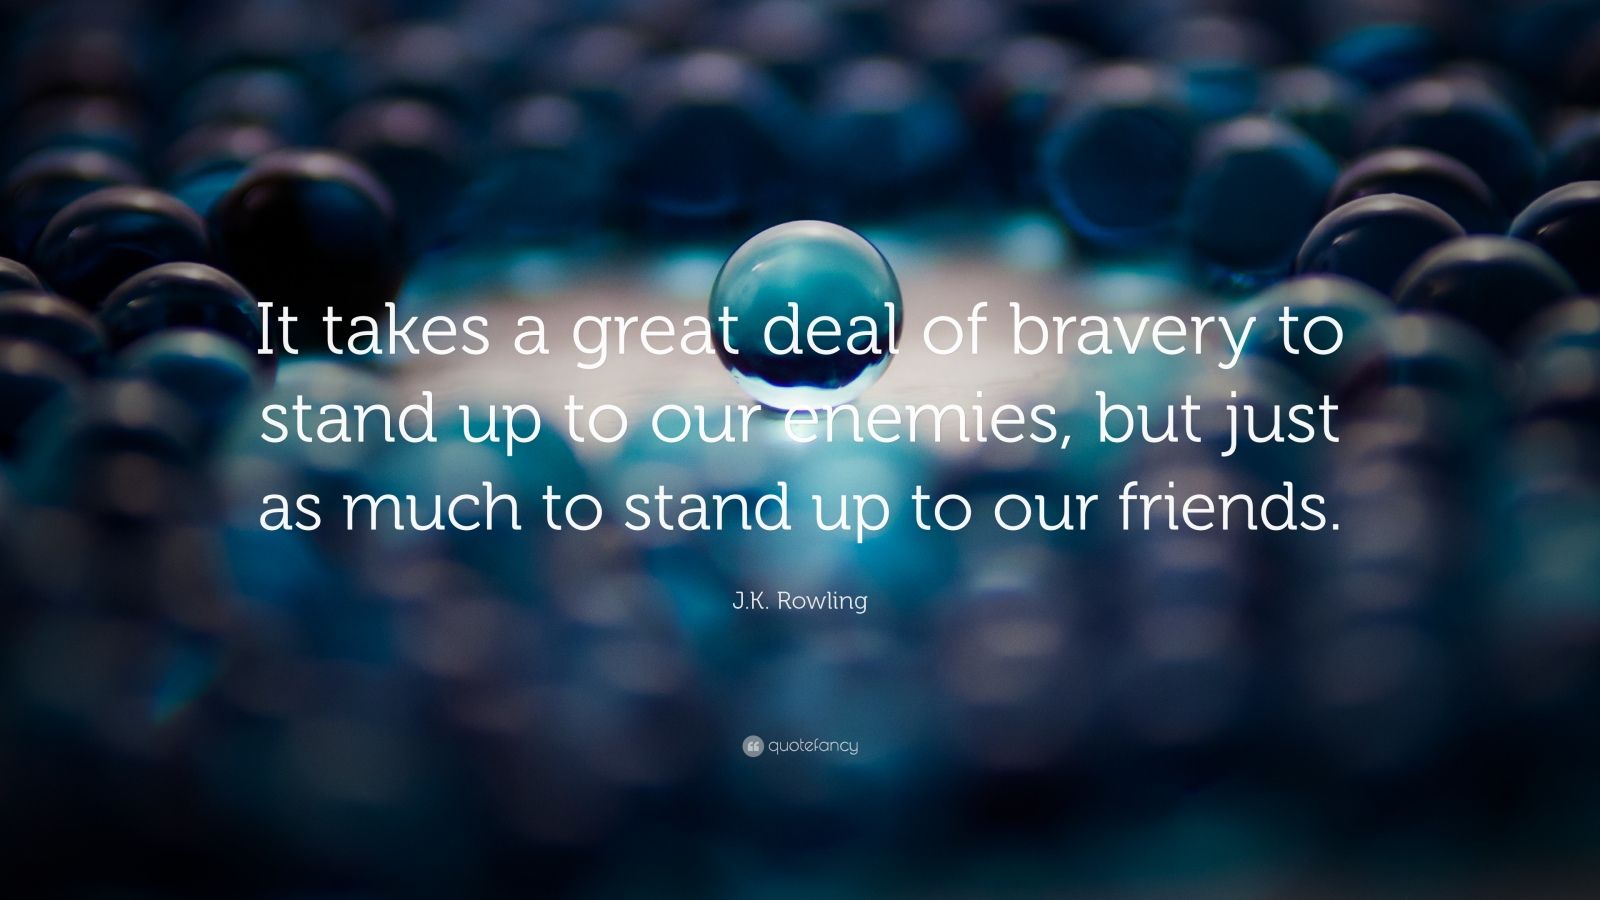 Courage Quotes (56 wallpapers) - Quotefancy